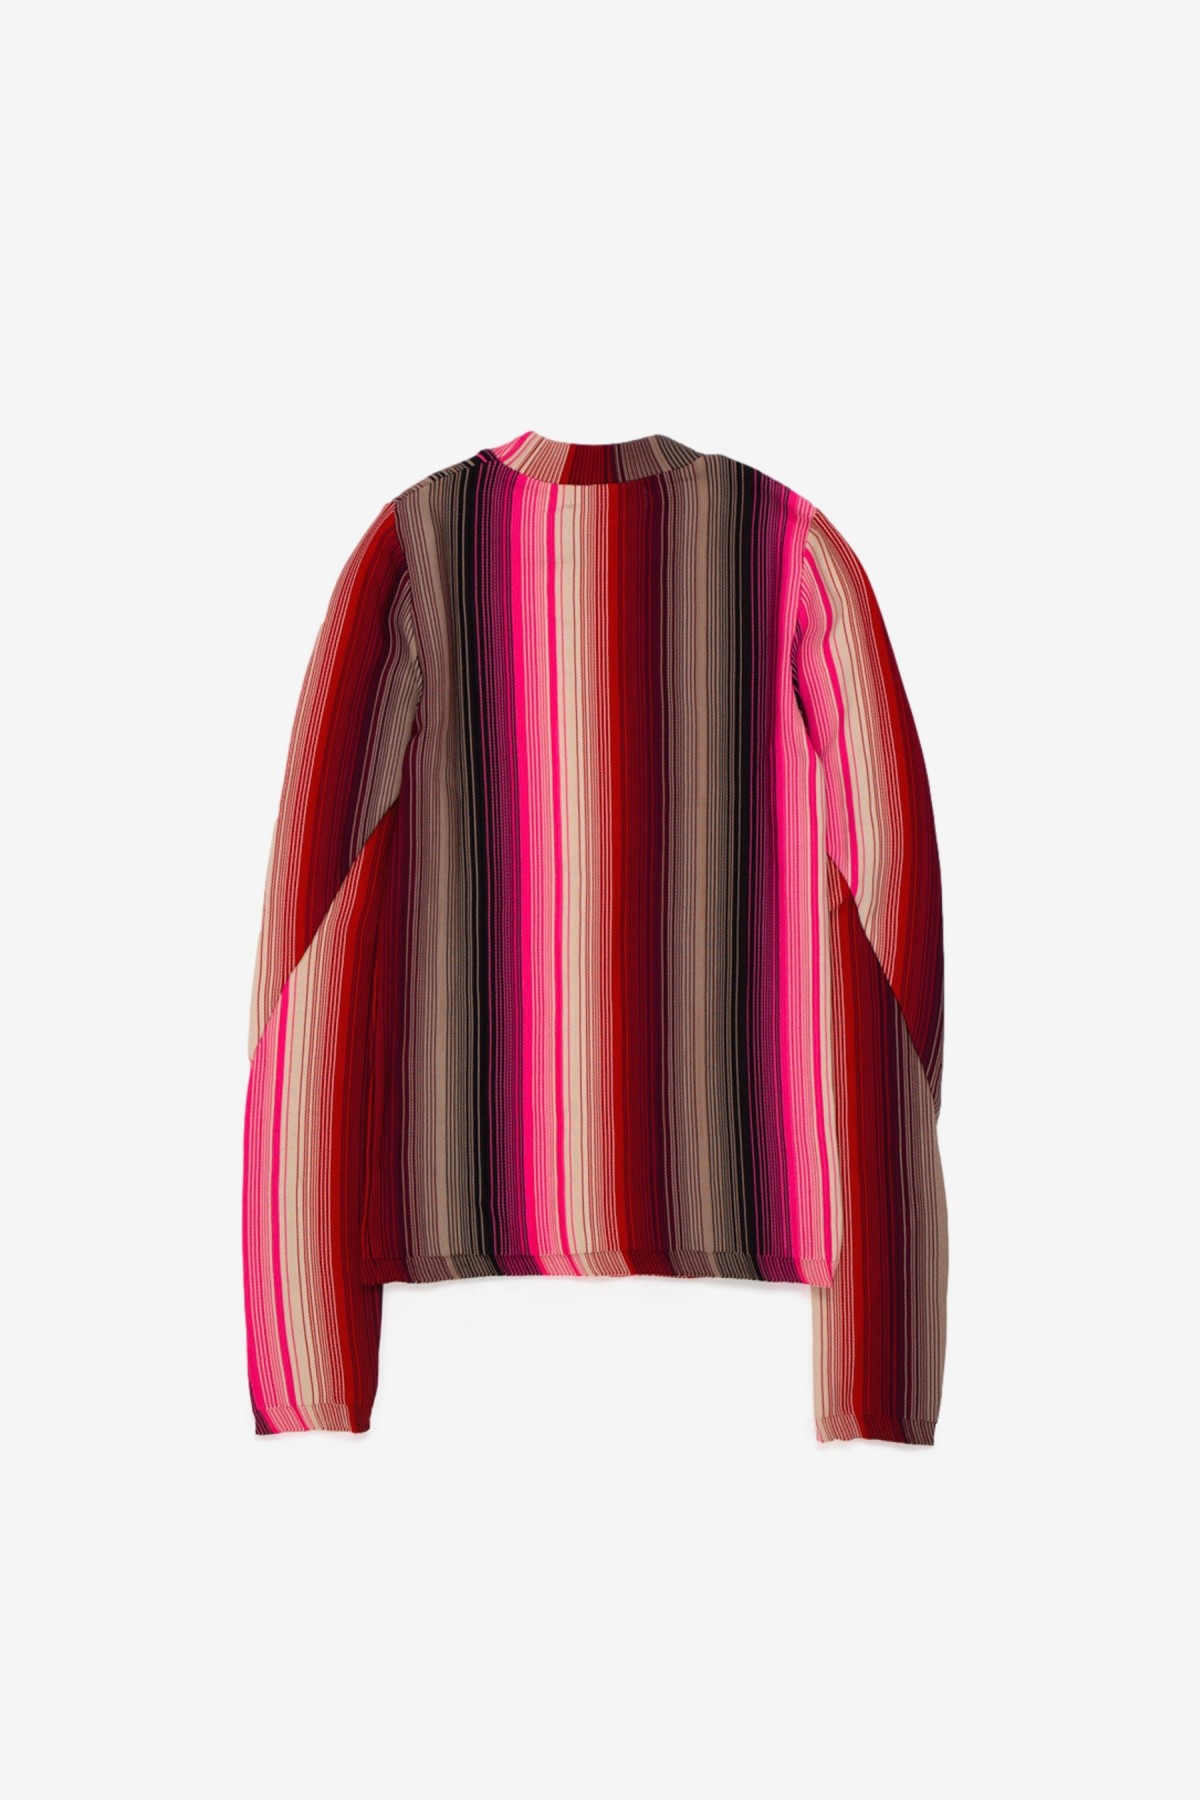 Anne Isabella Fade Stripe Long Sleeve Knit in Recy-ester Red